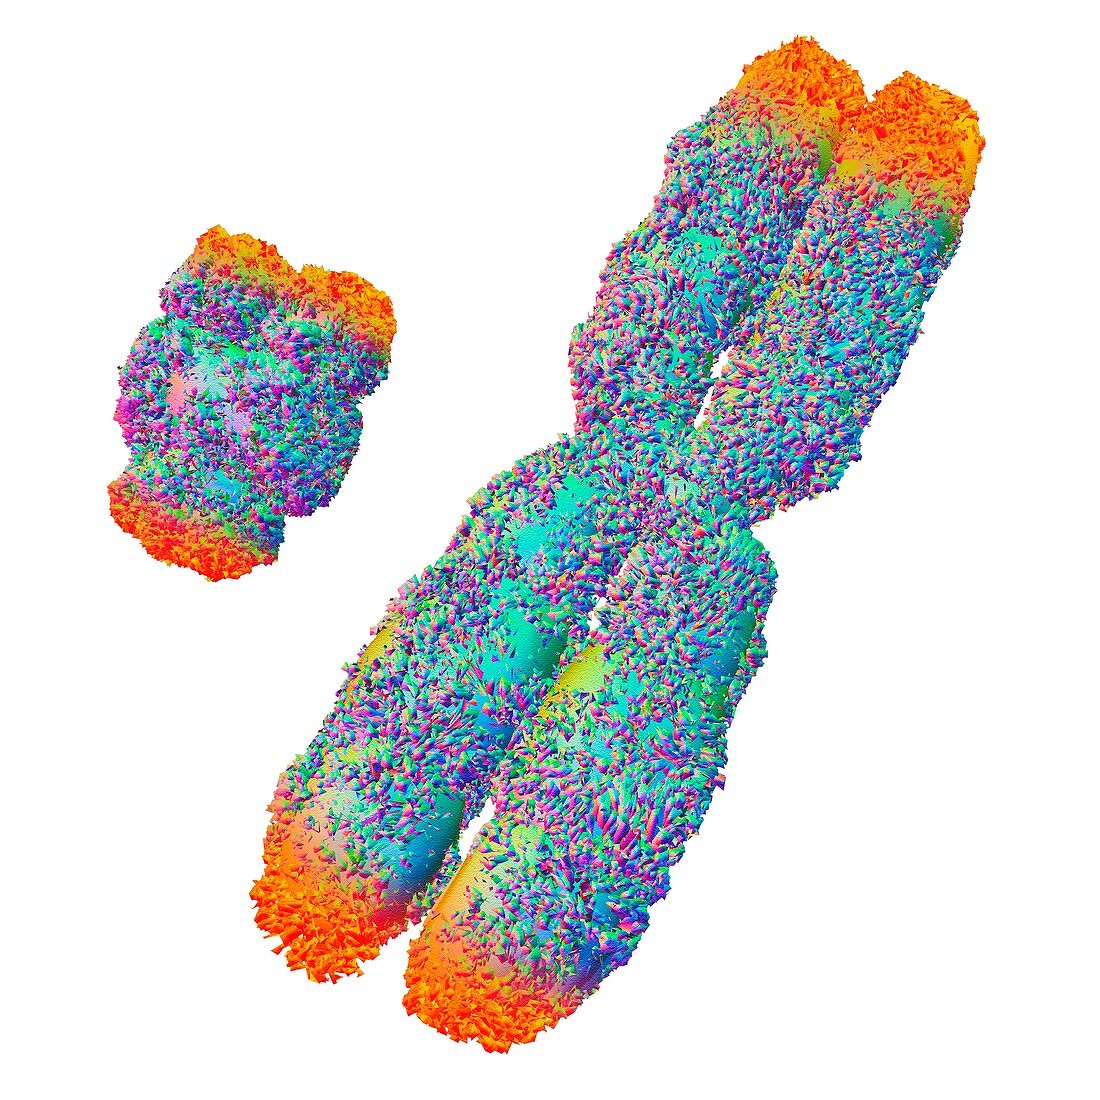 Y and X chromosome with telomeres